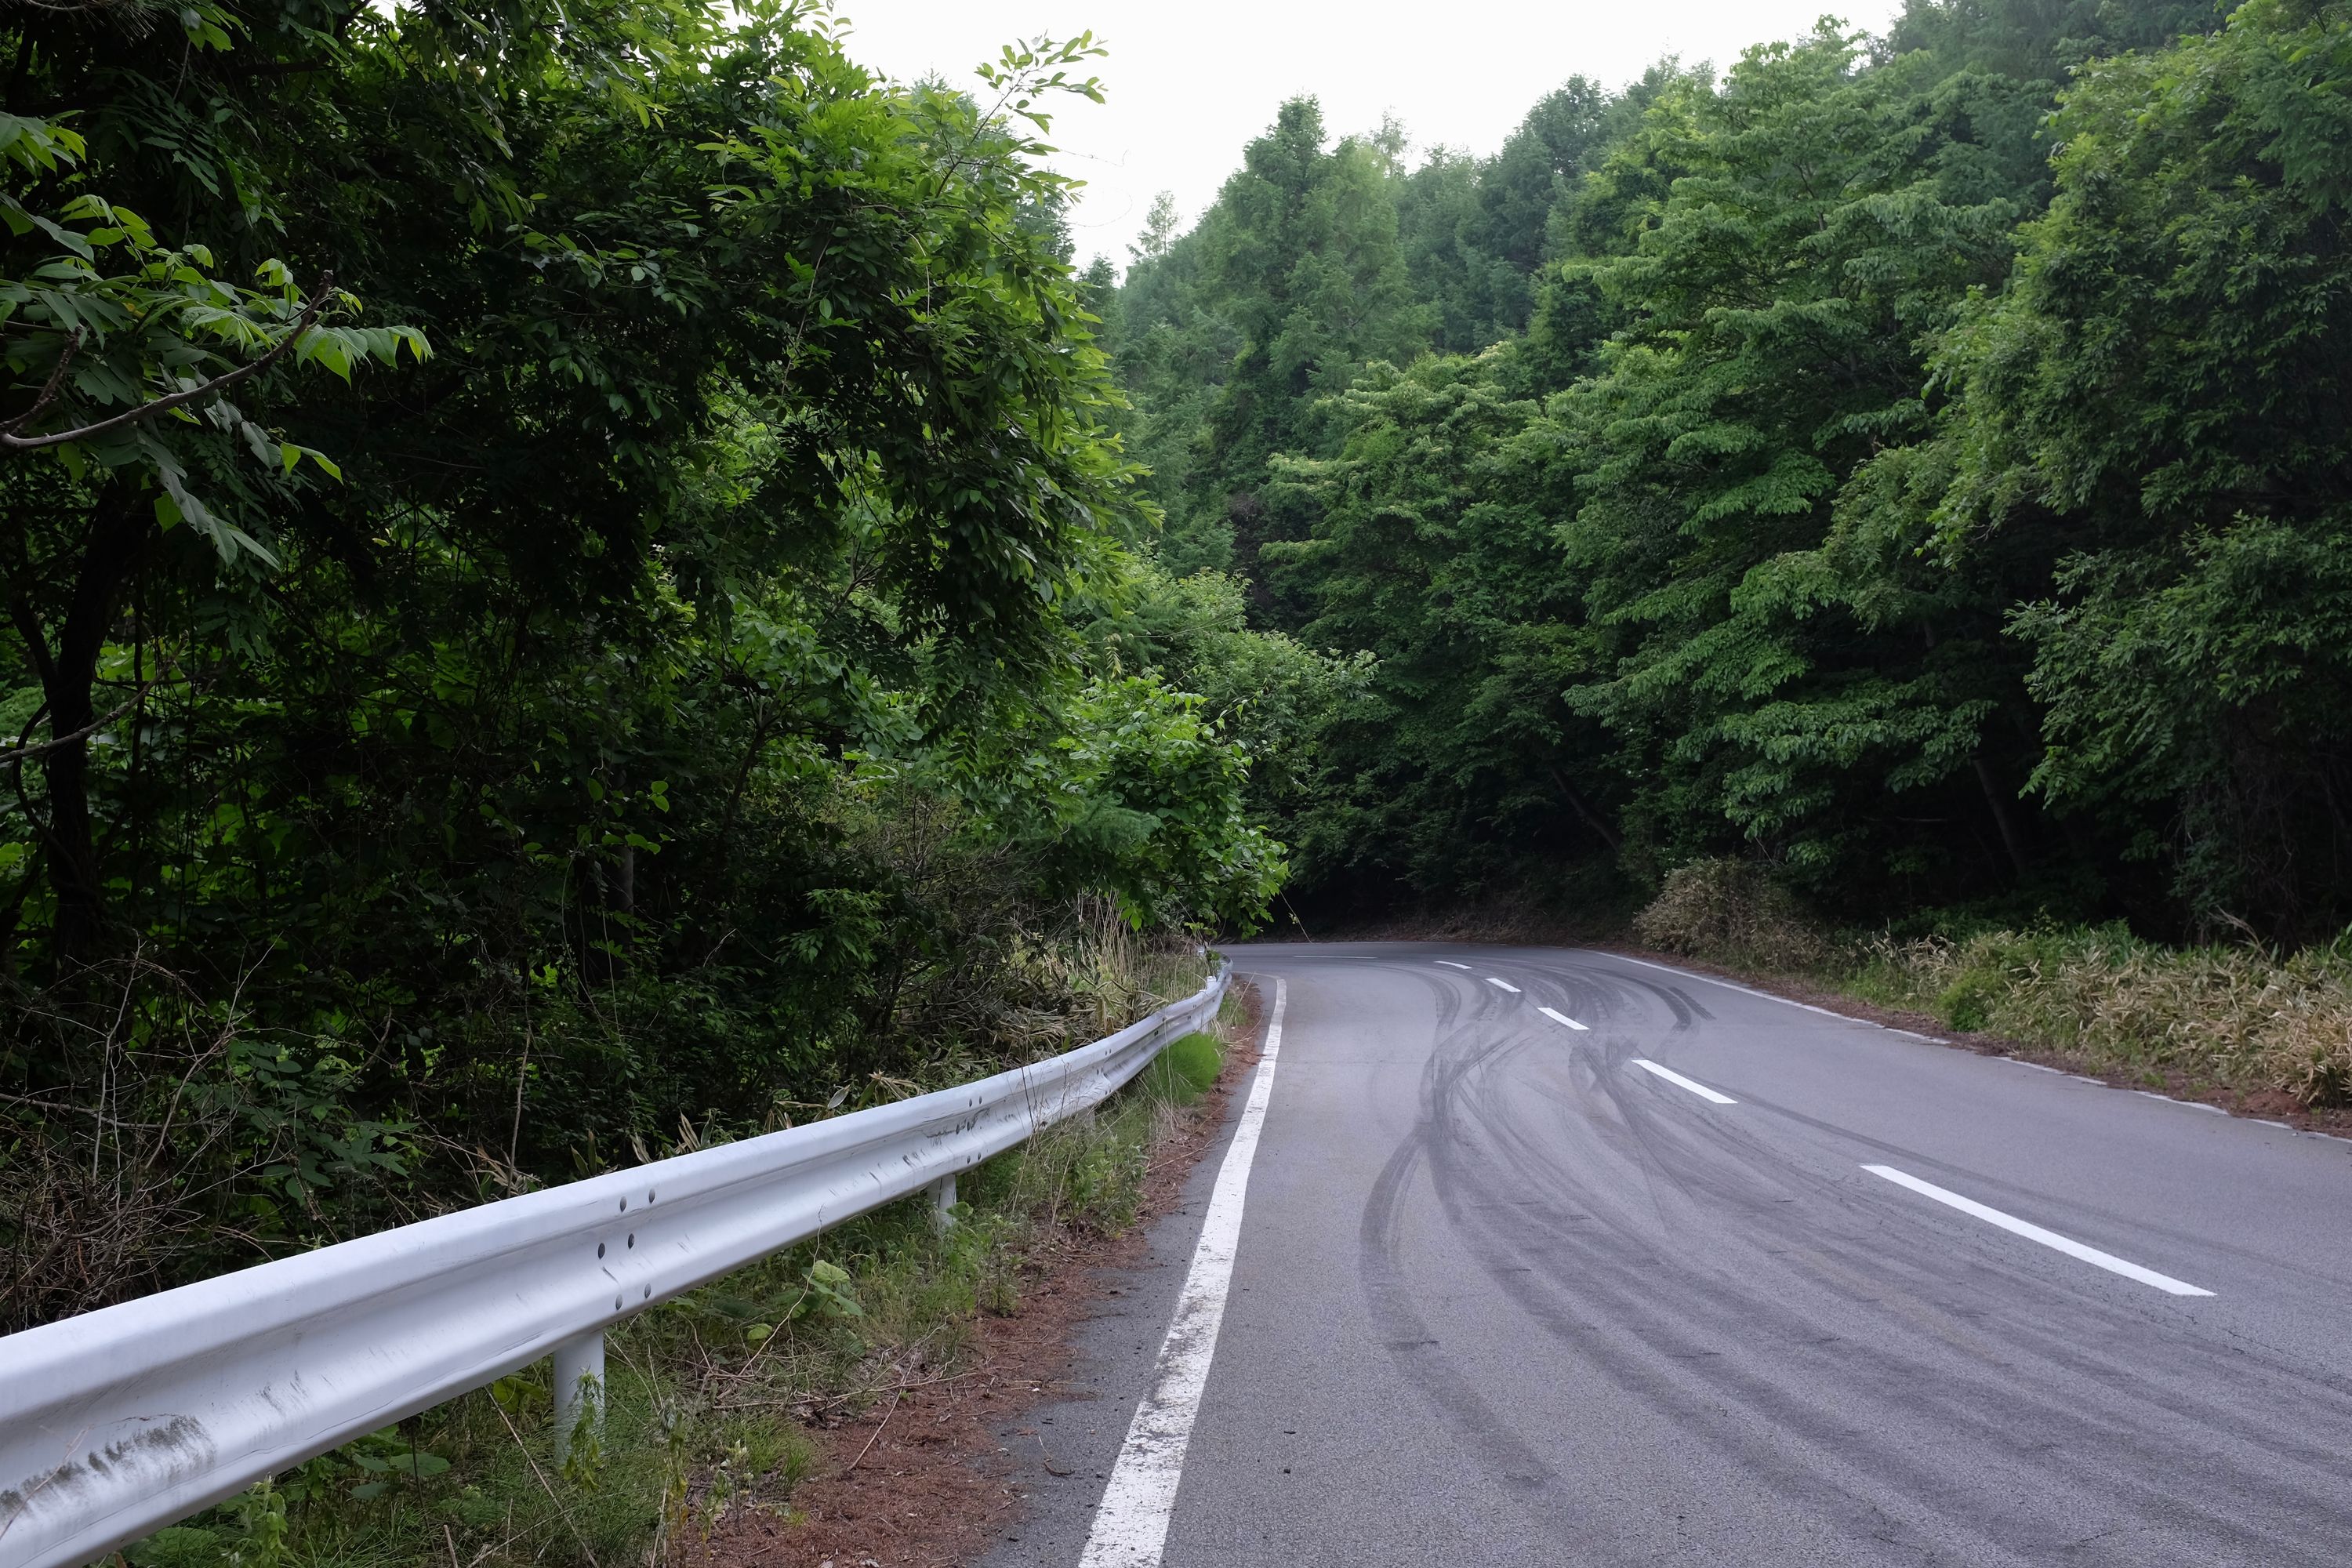 A mountain road shows tire marks indicating drifting-style car races.